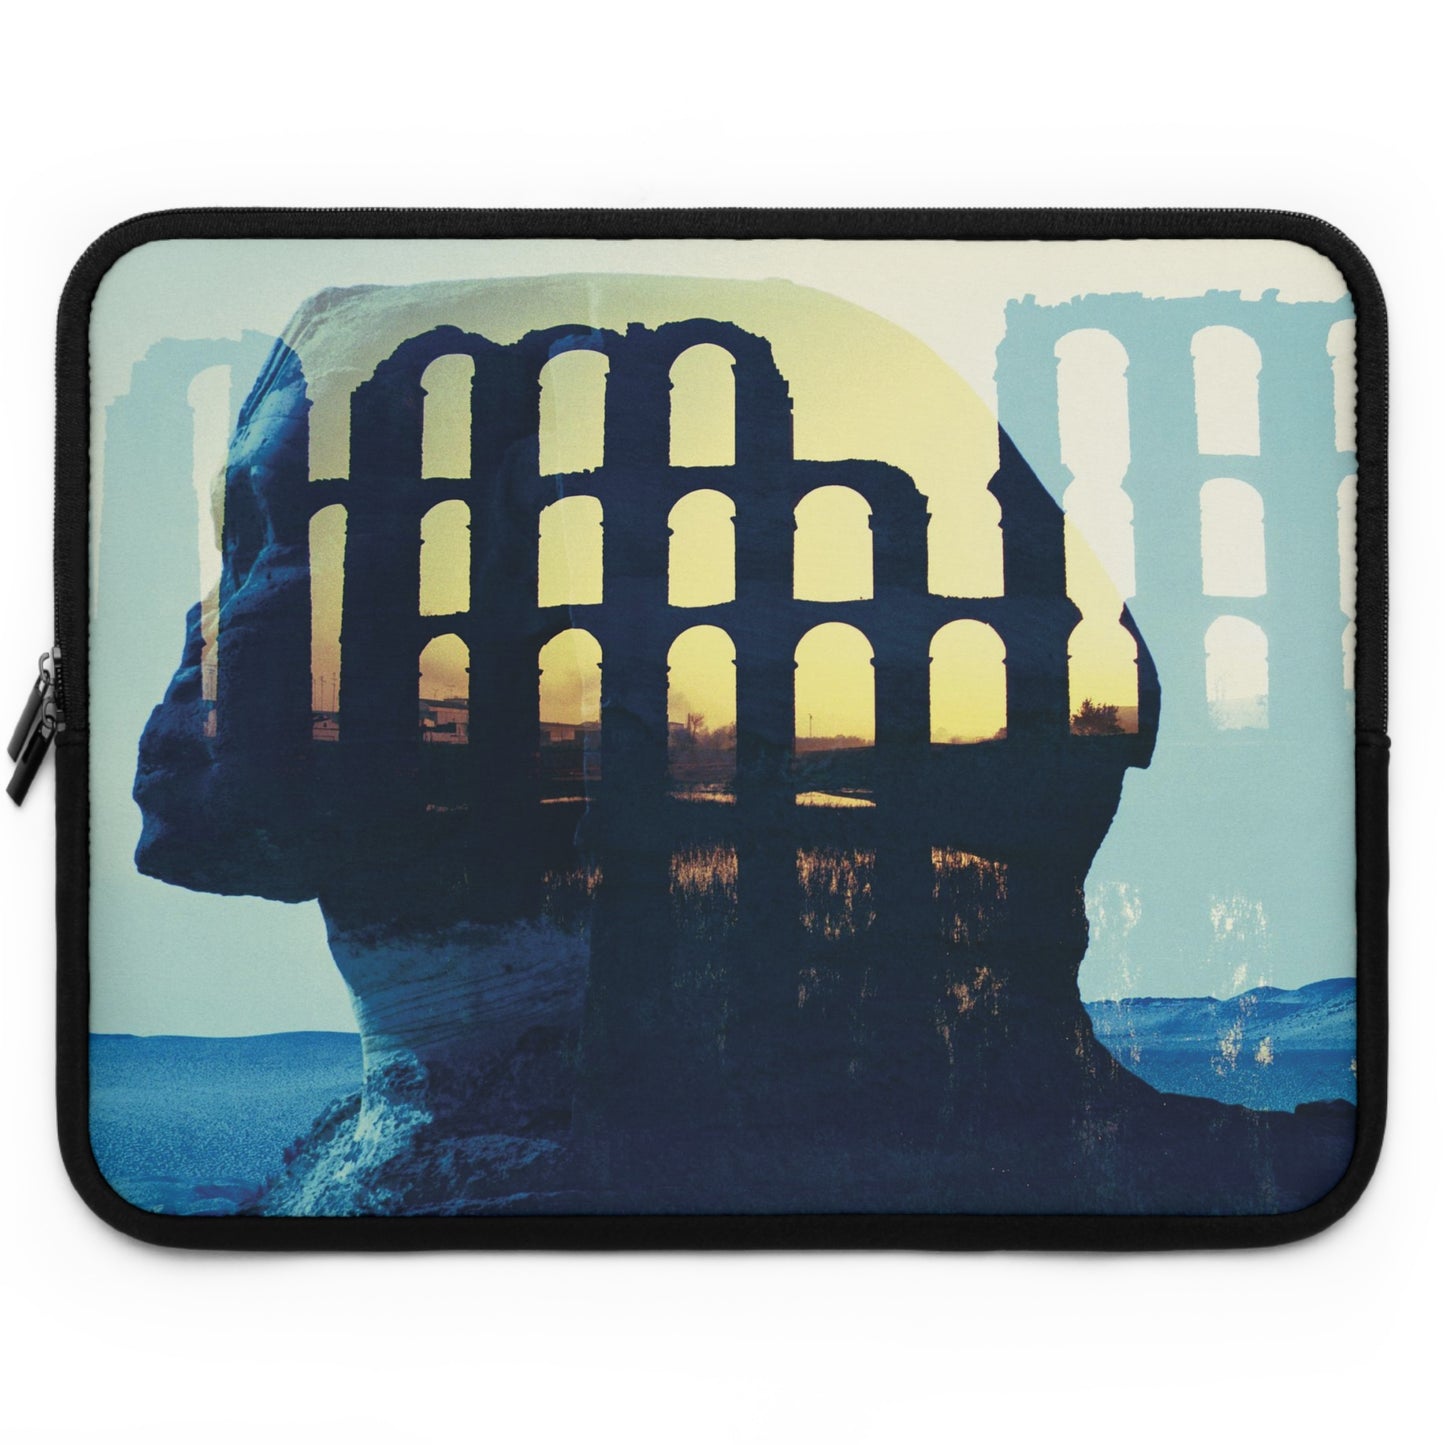 The Ages Of Man Laptop Sleeve